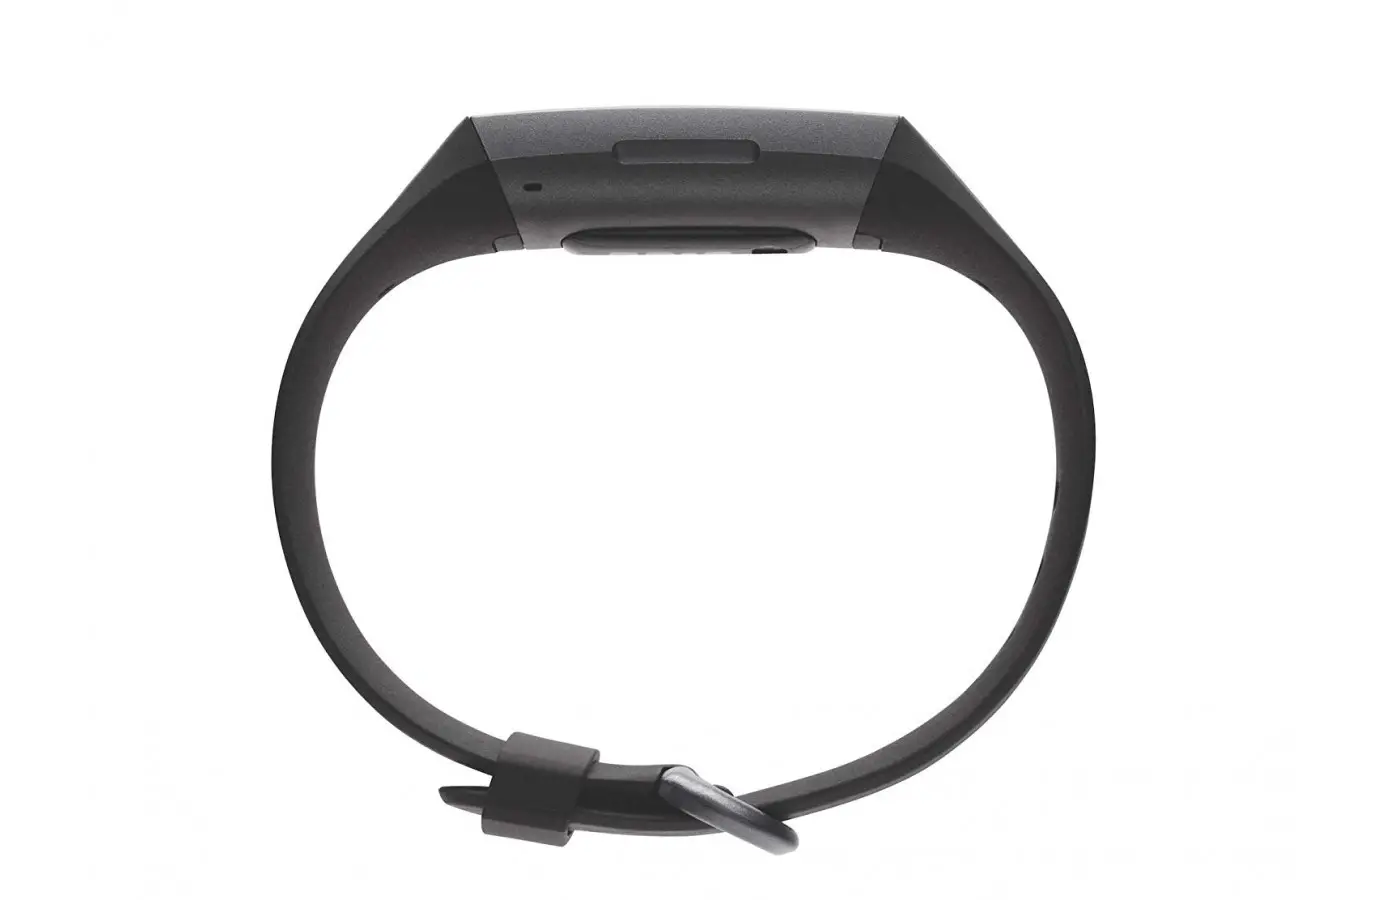 The Fitbit Charge 3 offers a woven band for a comfortable, lightweight fit.